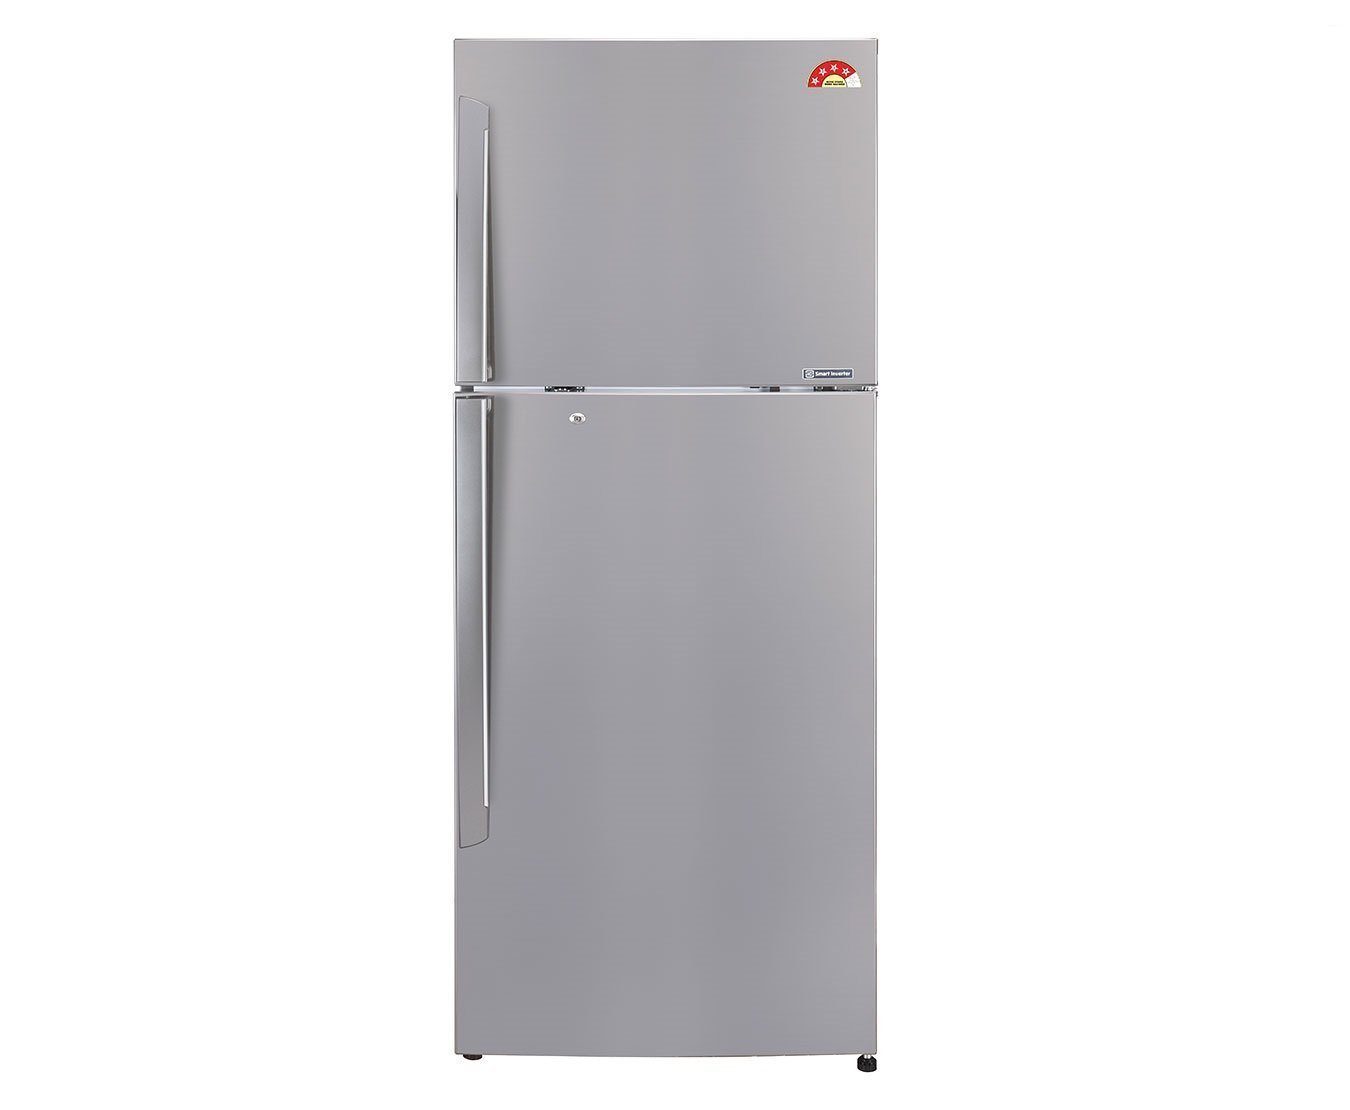 Amazon - Buy LG GL-I322RPZL Frost-free Double-door Refrigerator (308 Ltrs, 4 Star Rating, Shinny Steel) for Rs.25,940